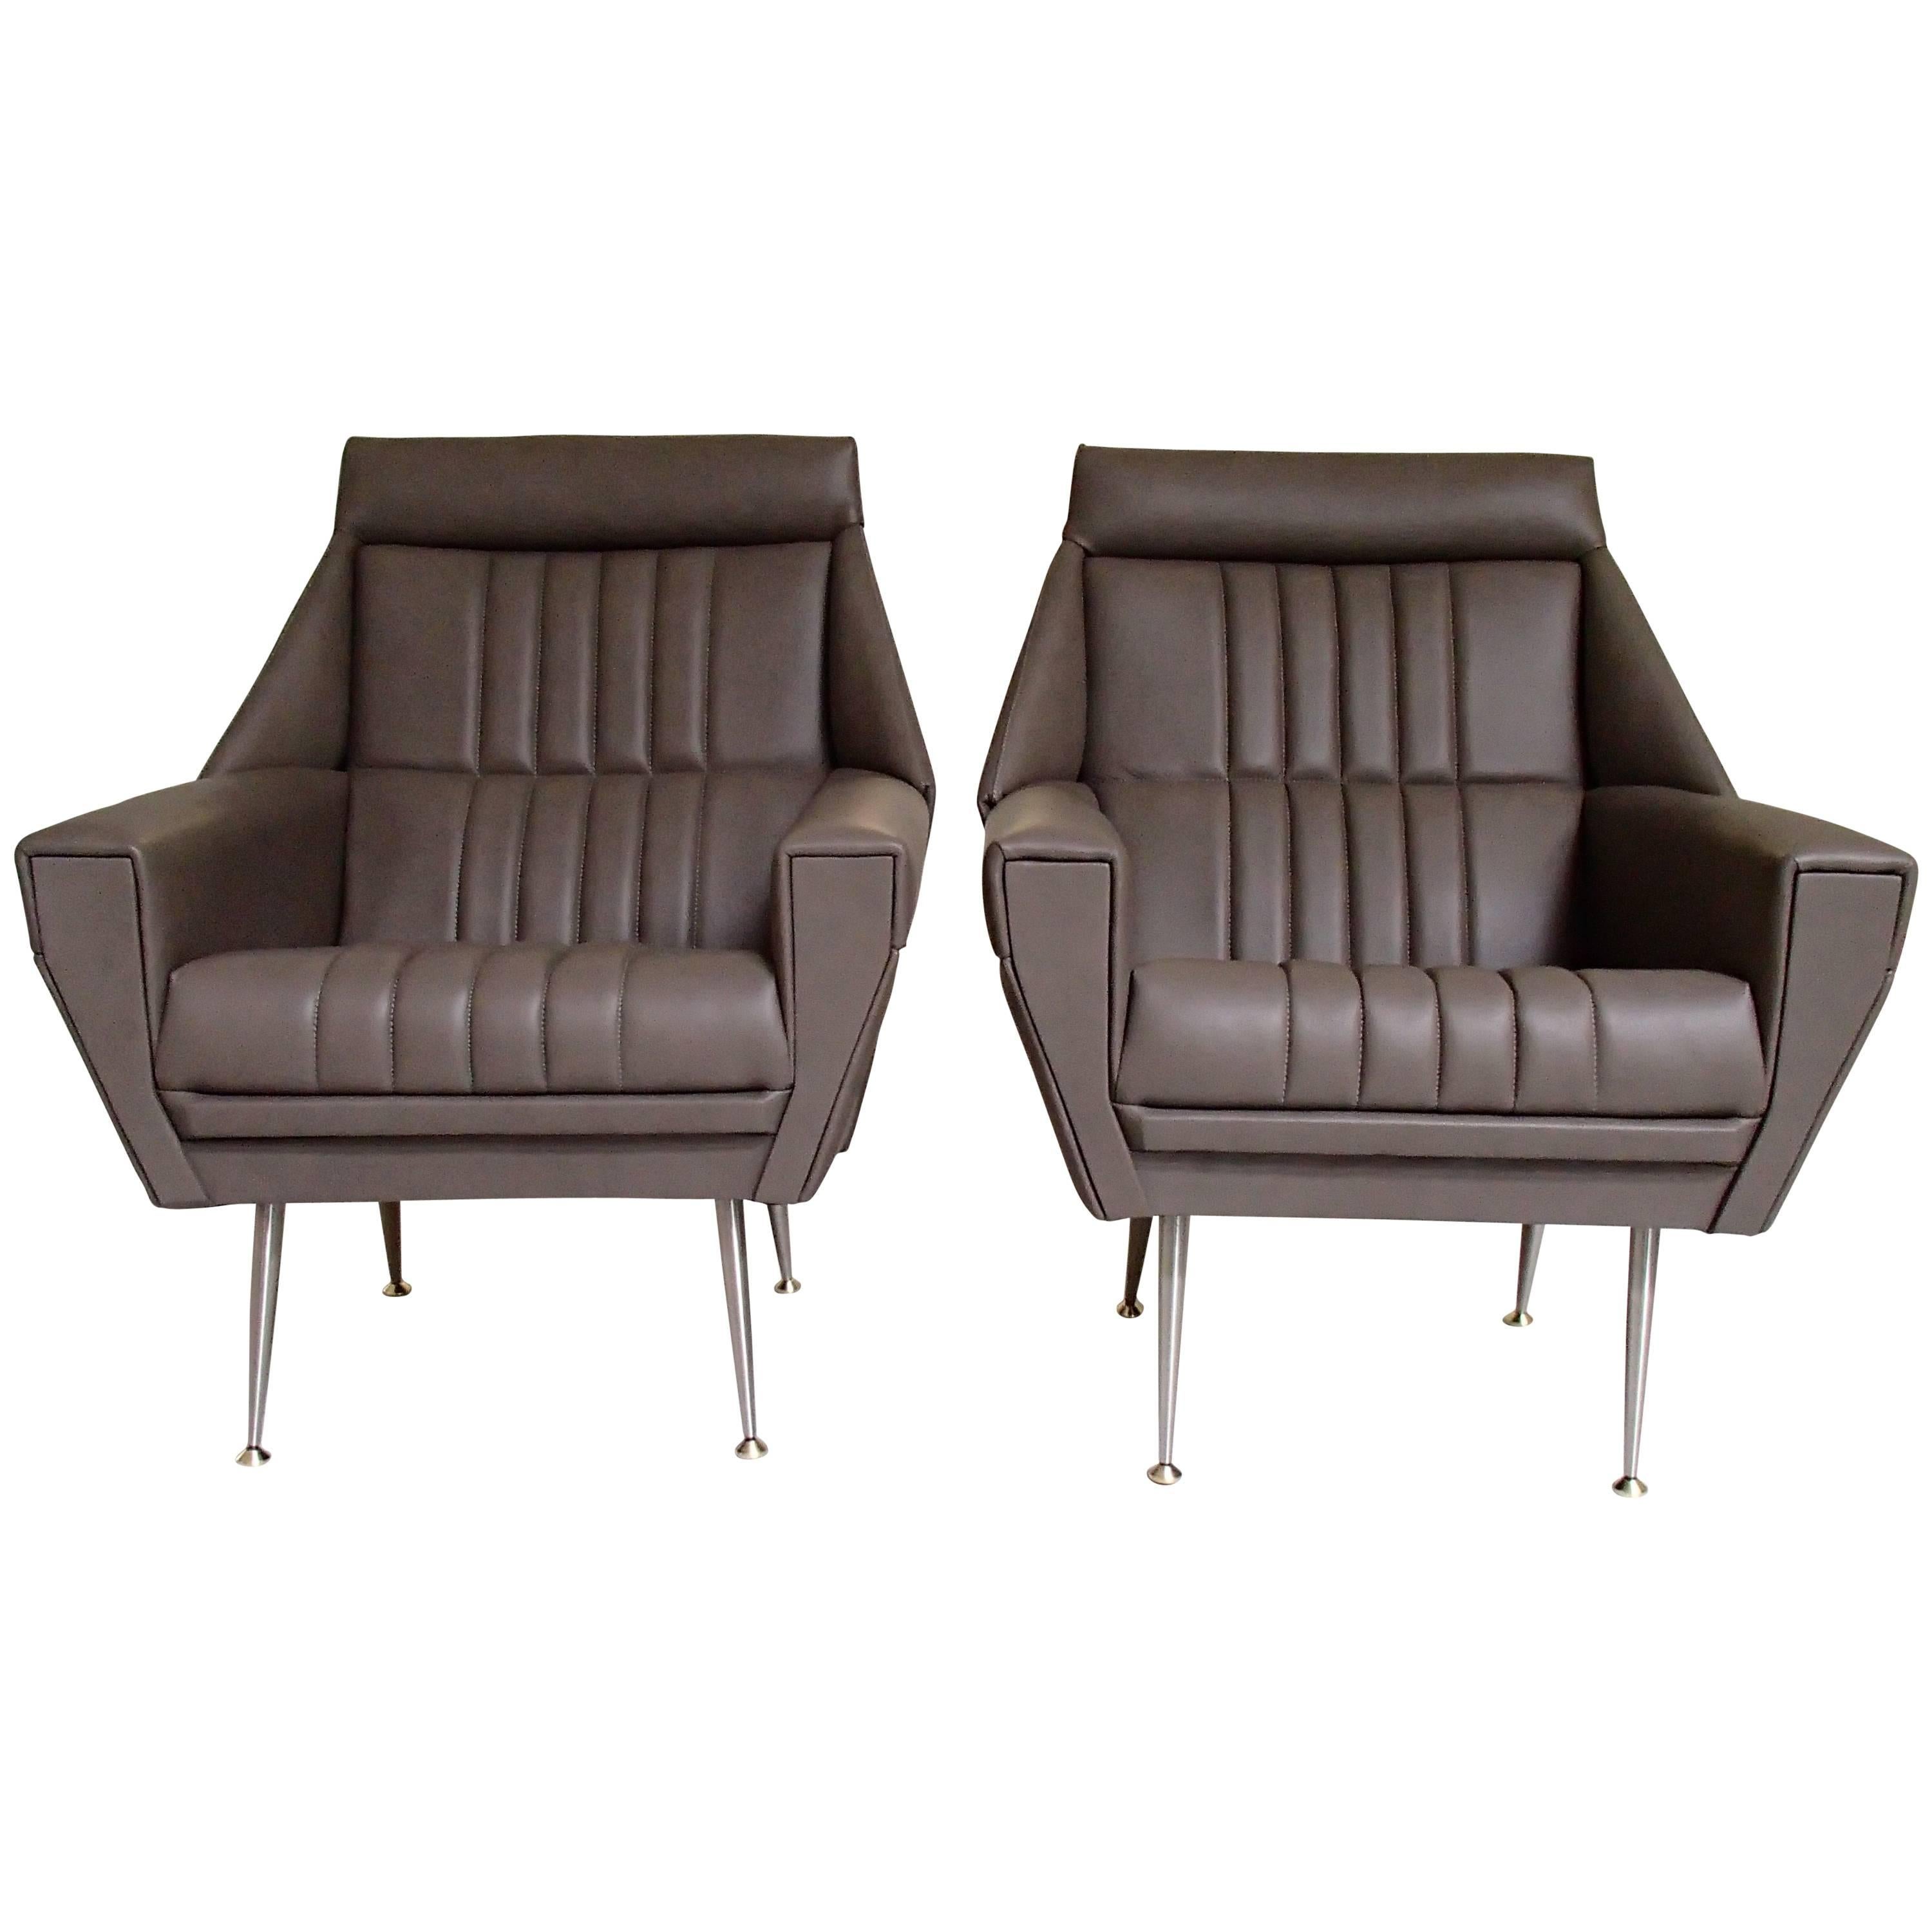 Pair of Mid-Century Modern Armchairs Grey Greenish Leather For Sale